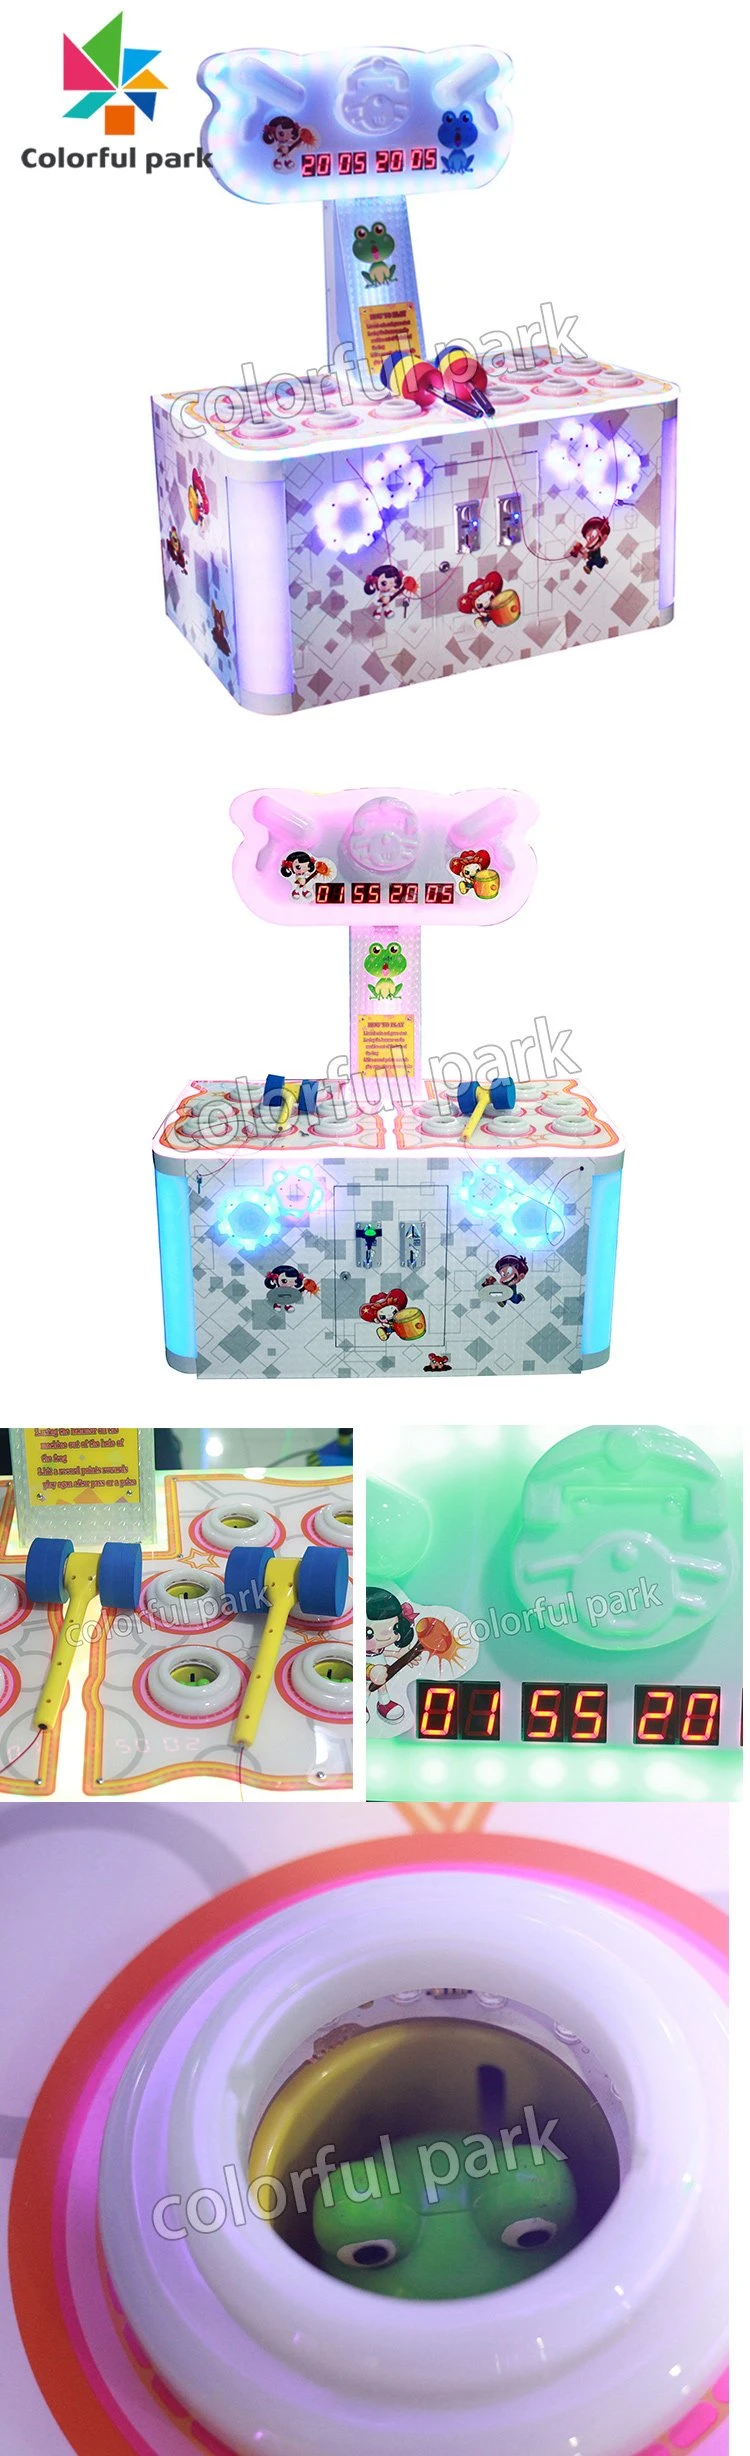 Colorful Park Coin Operated Kids Video Game Machine Luxury Whac-a-Mole Arcade Game Machine